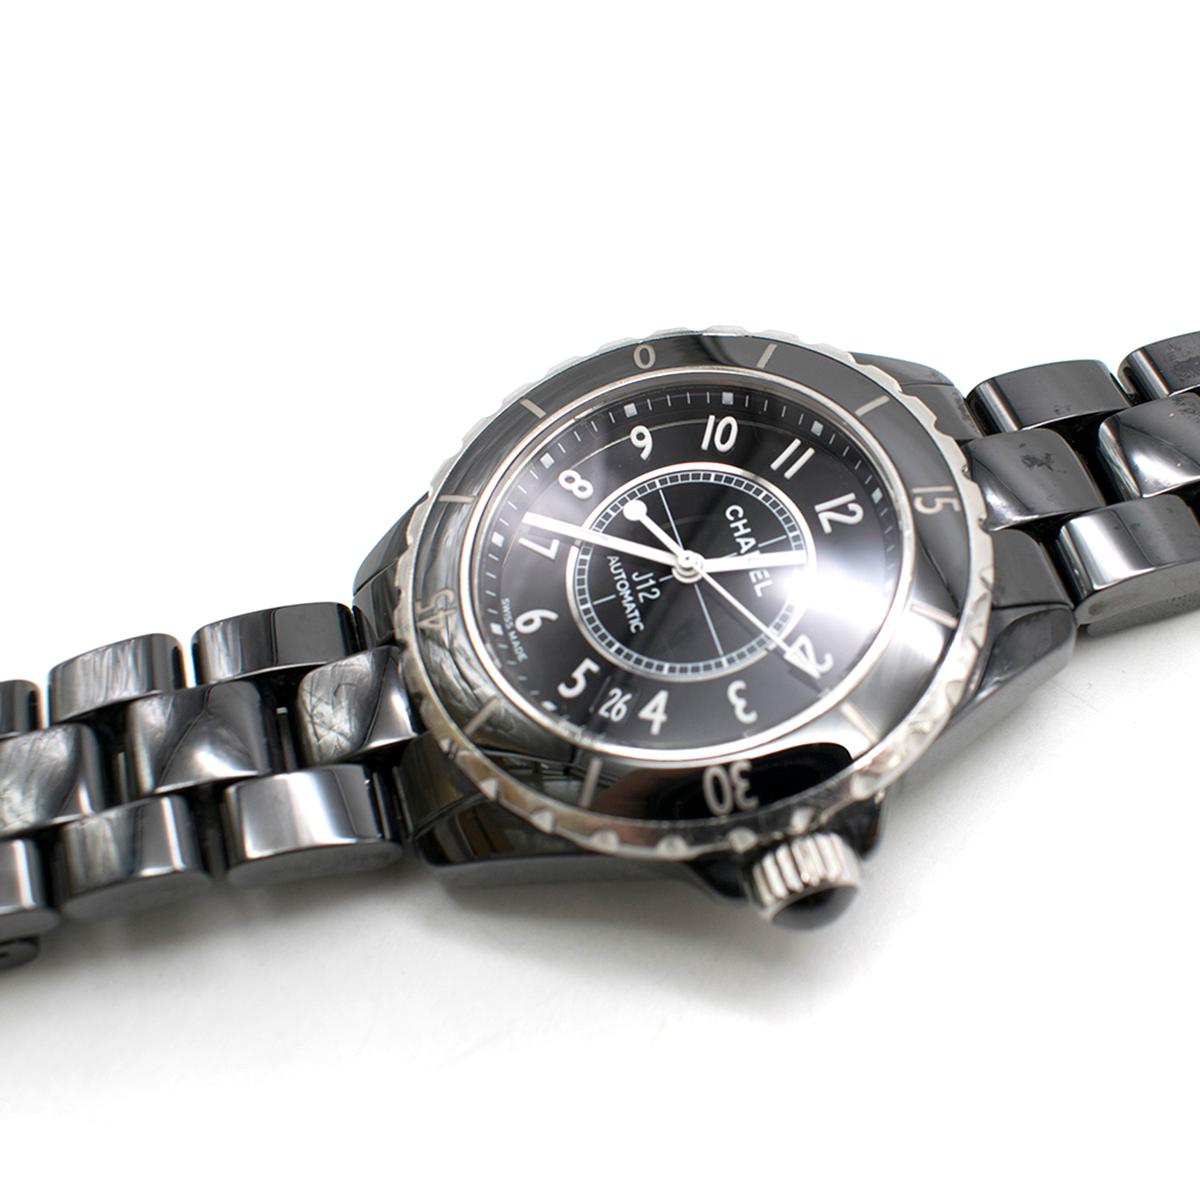 Chanel Black & Silver J12 200 m water resistance Automatic Watch  4